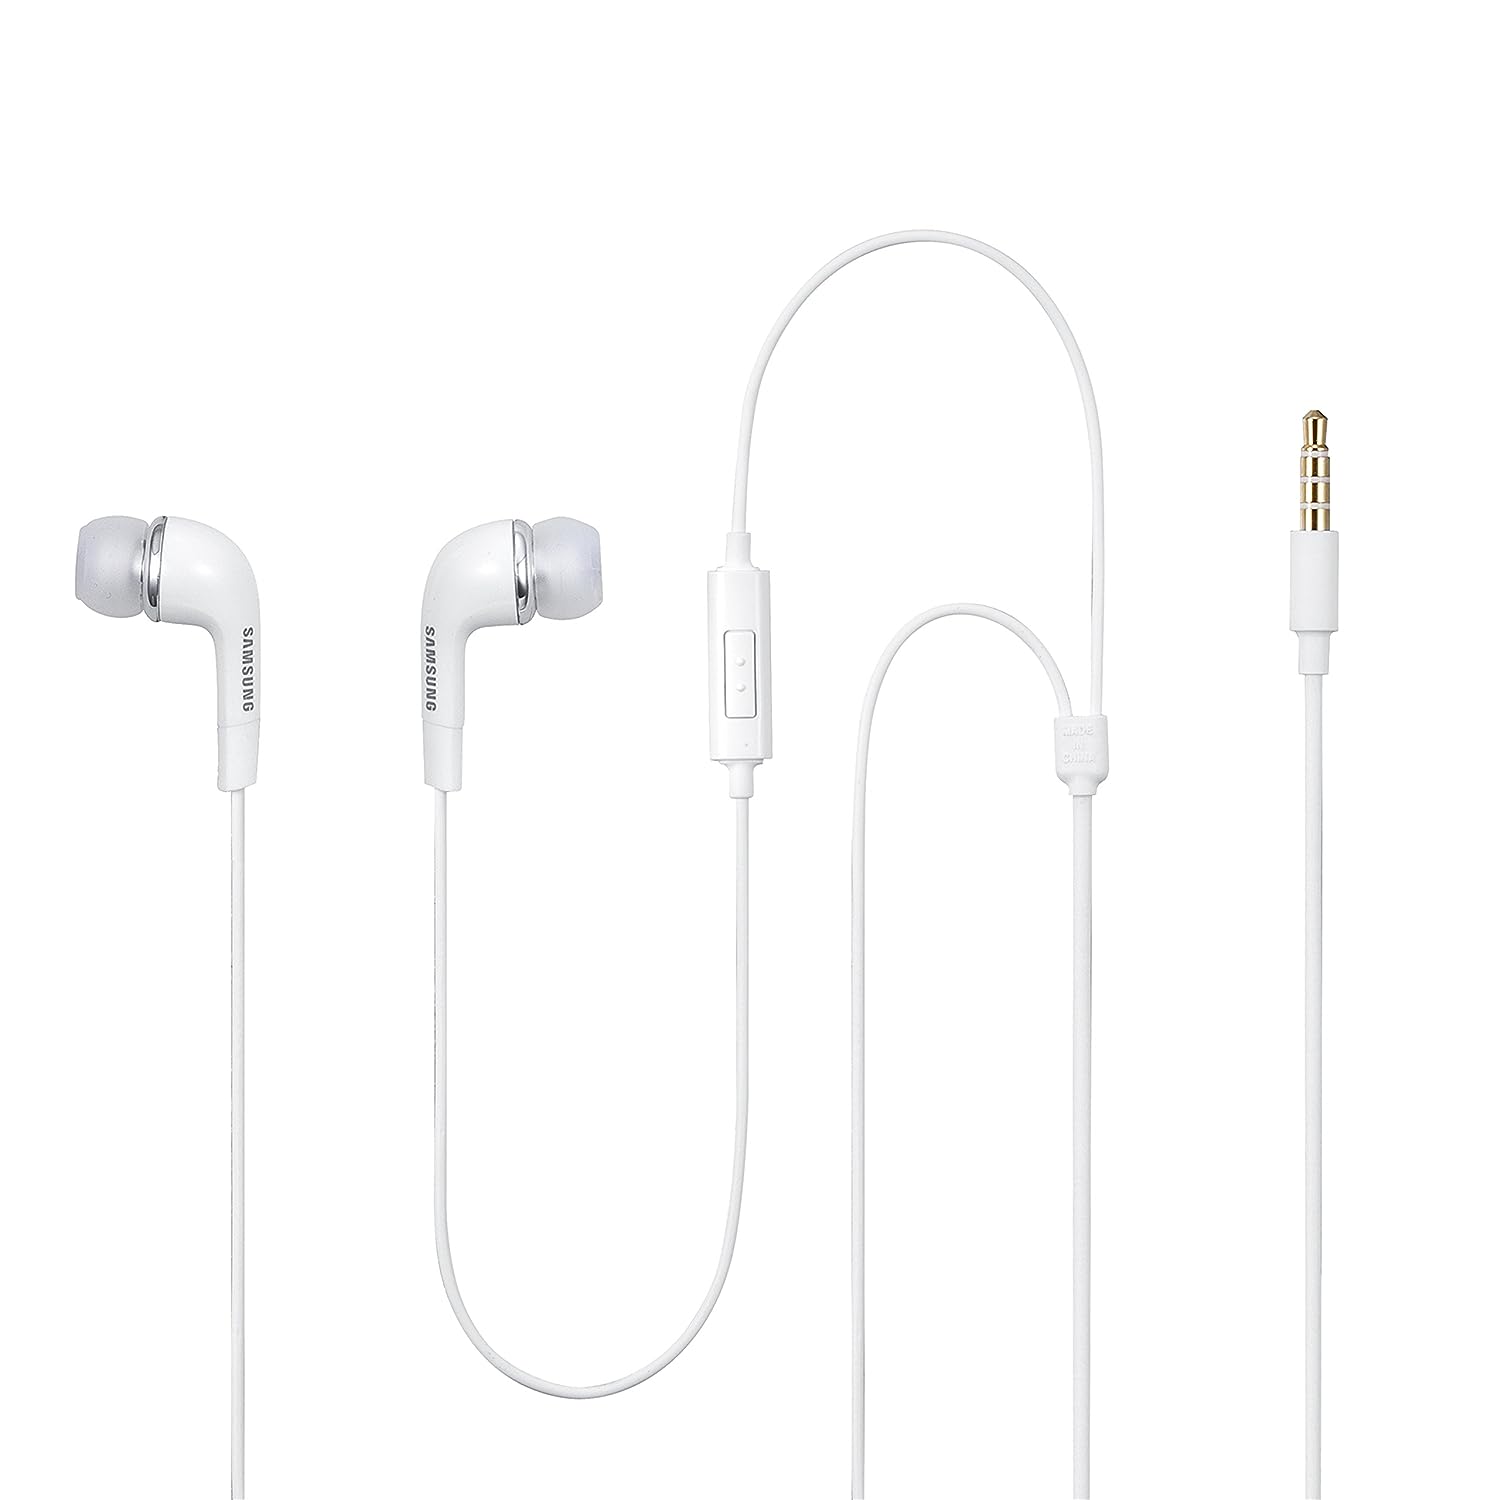 Samsung Ehs64 Wired In Ear Earphones With Mic With Remote Note (White)